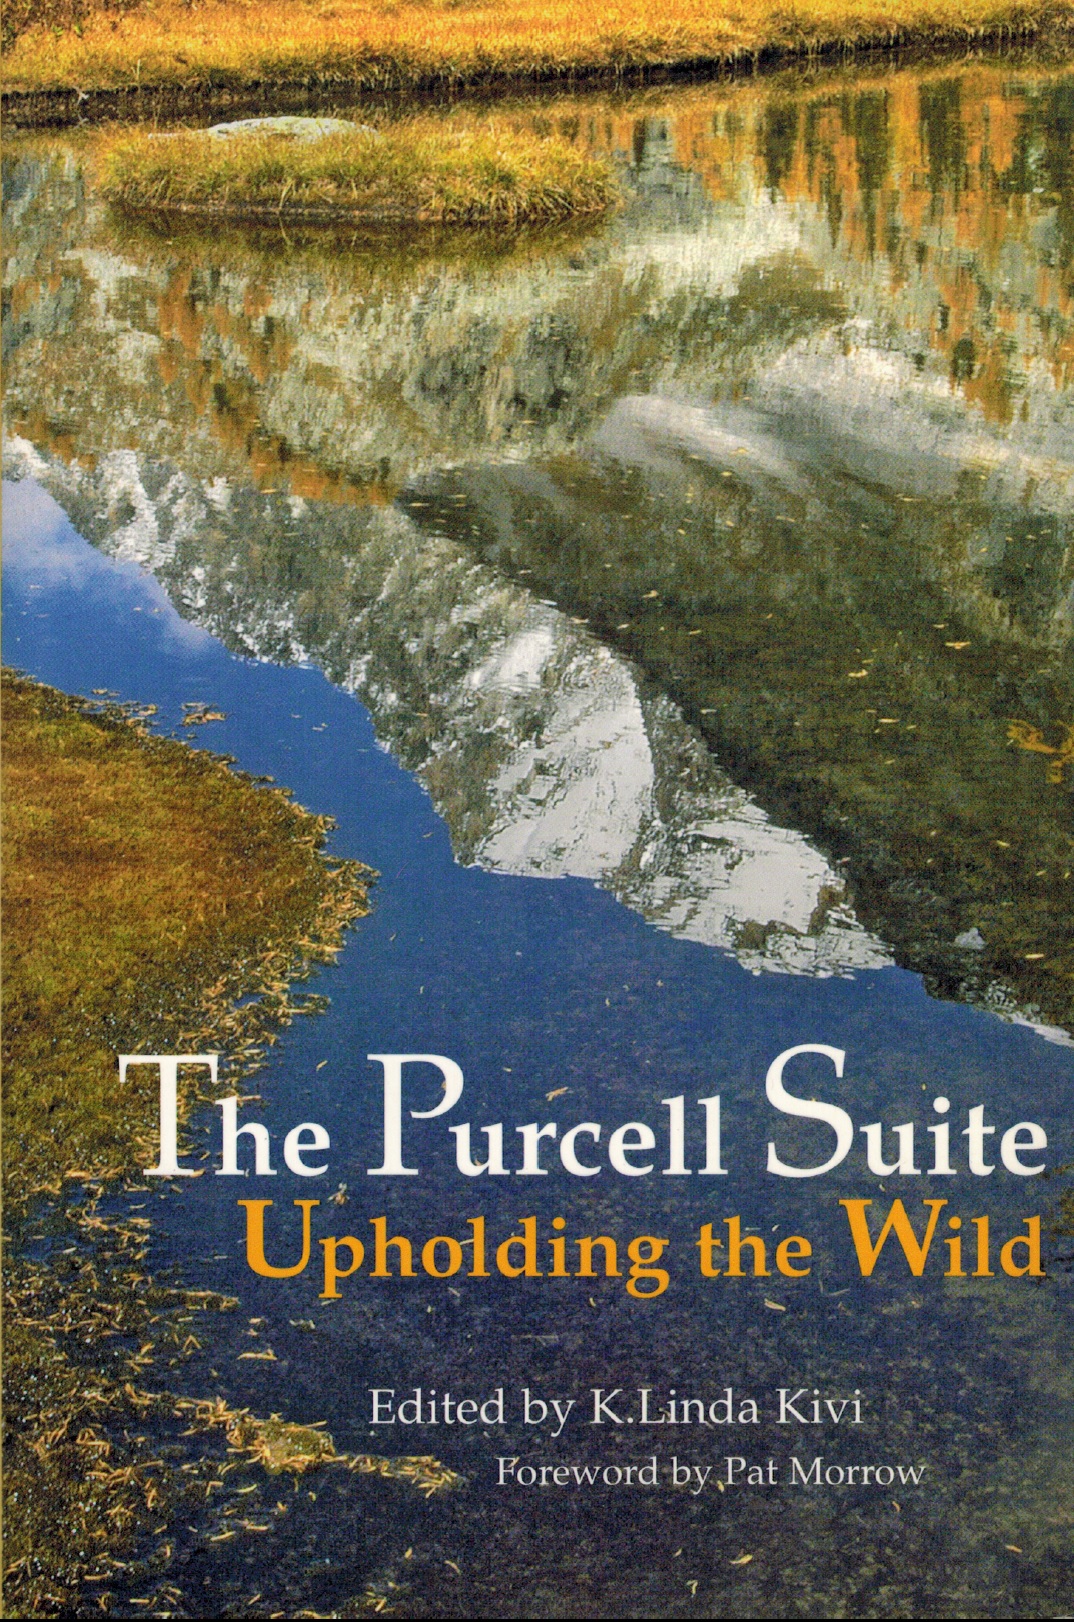 The Purcell Suite